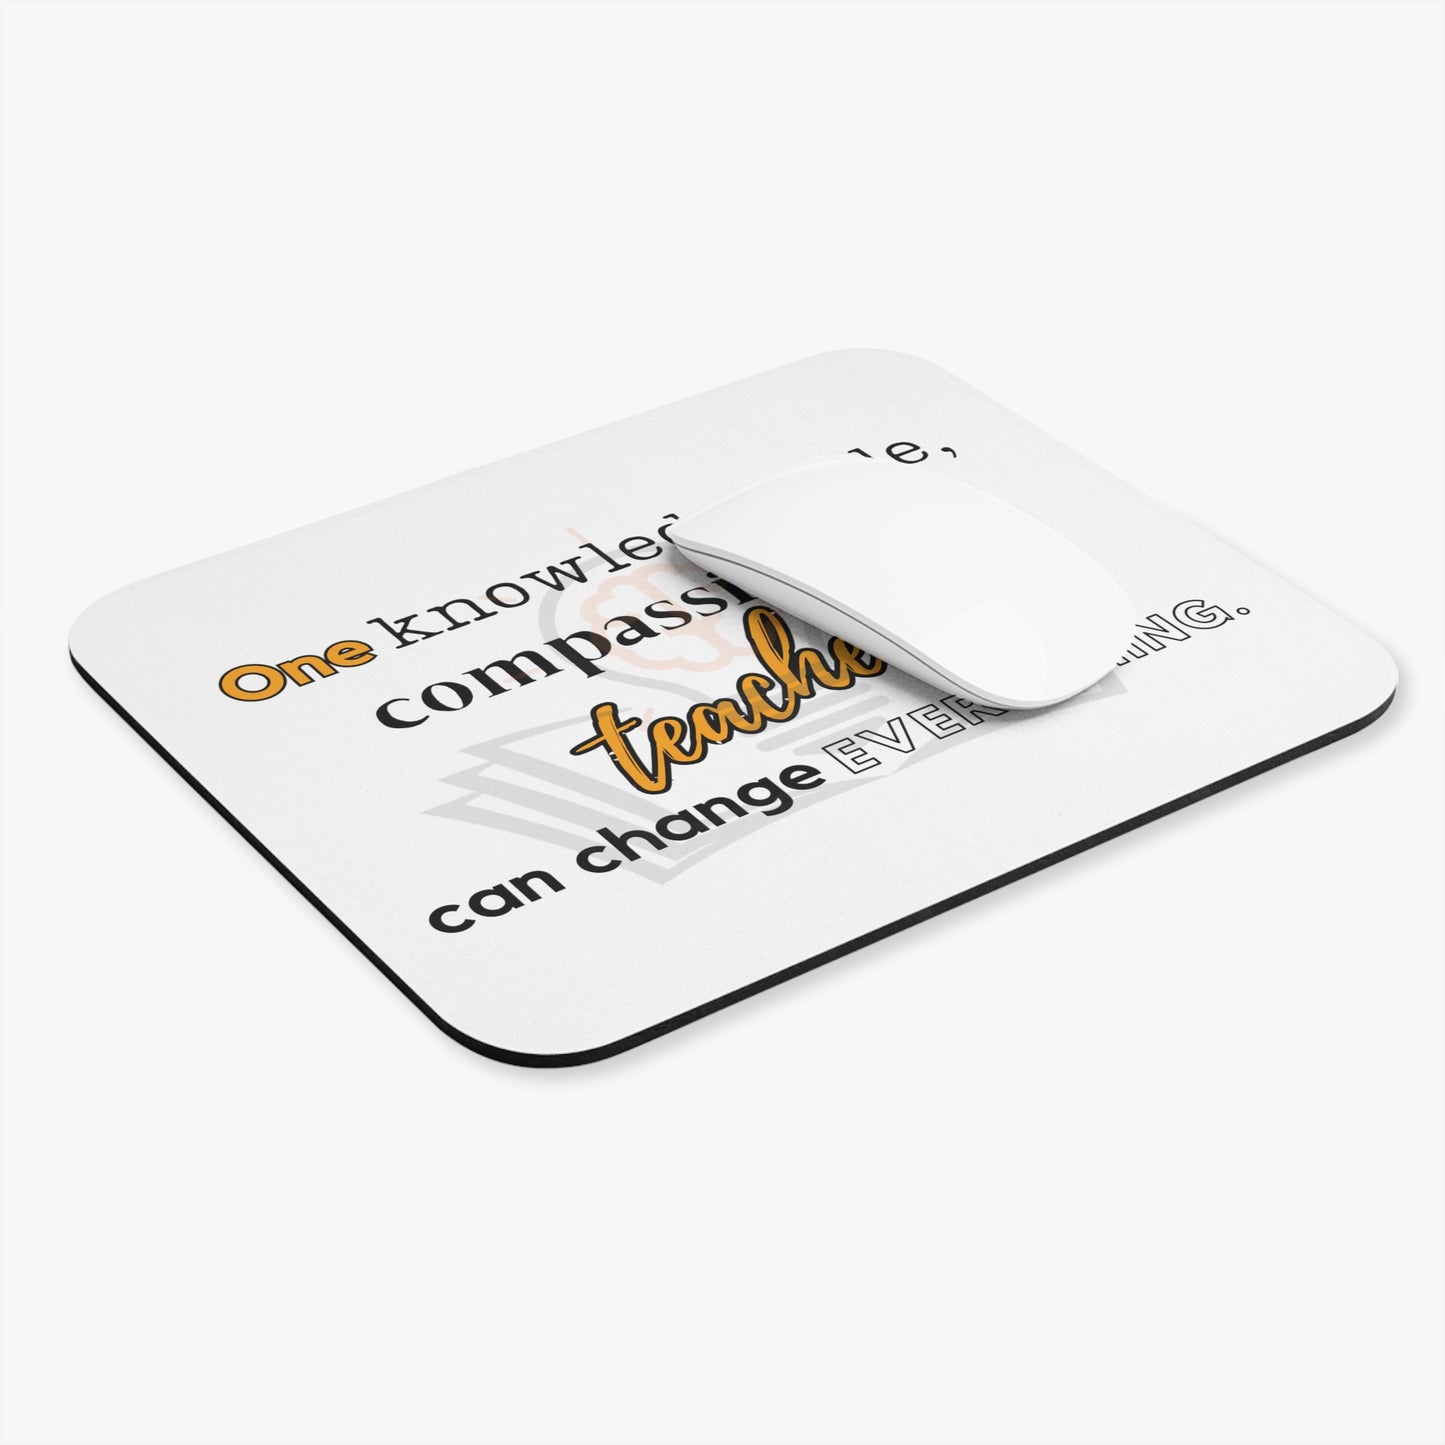 One Knowledgeable, Compassionate Teacher... Mouse Pad